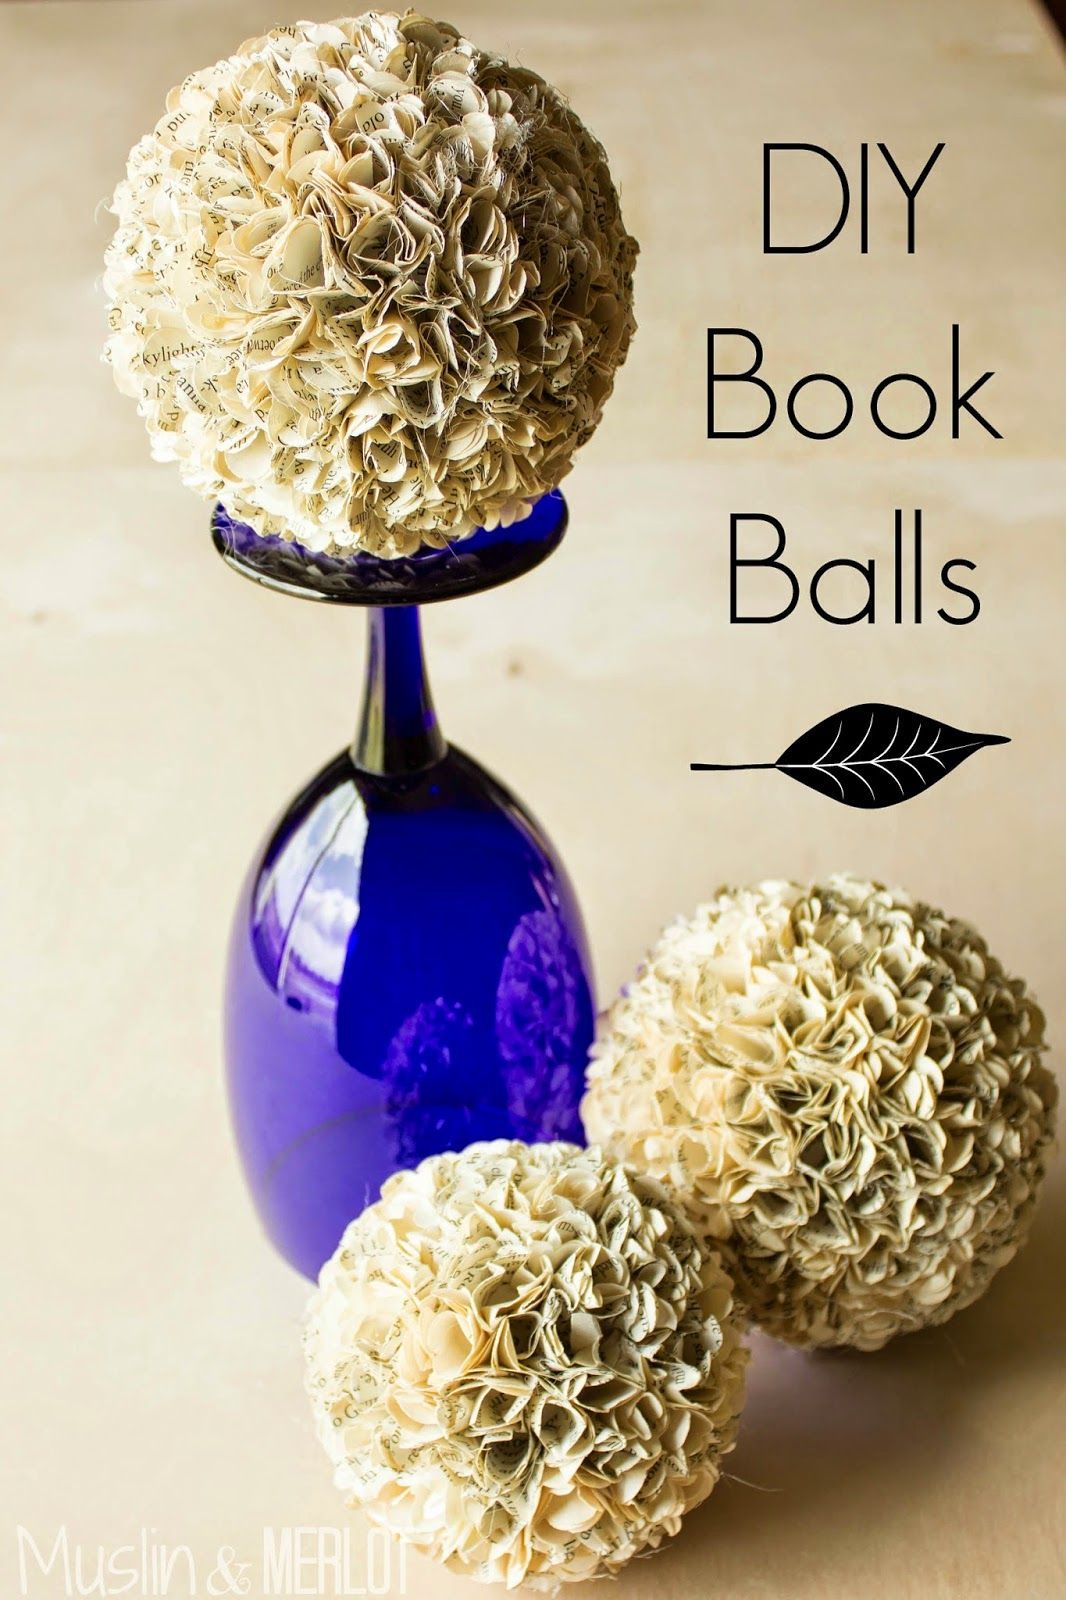 Book Balls! Of course, I would never destroy a book — but what about old phone books? ;)